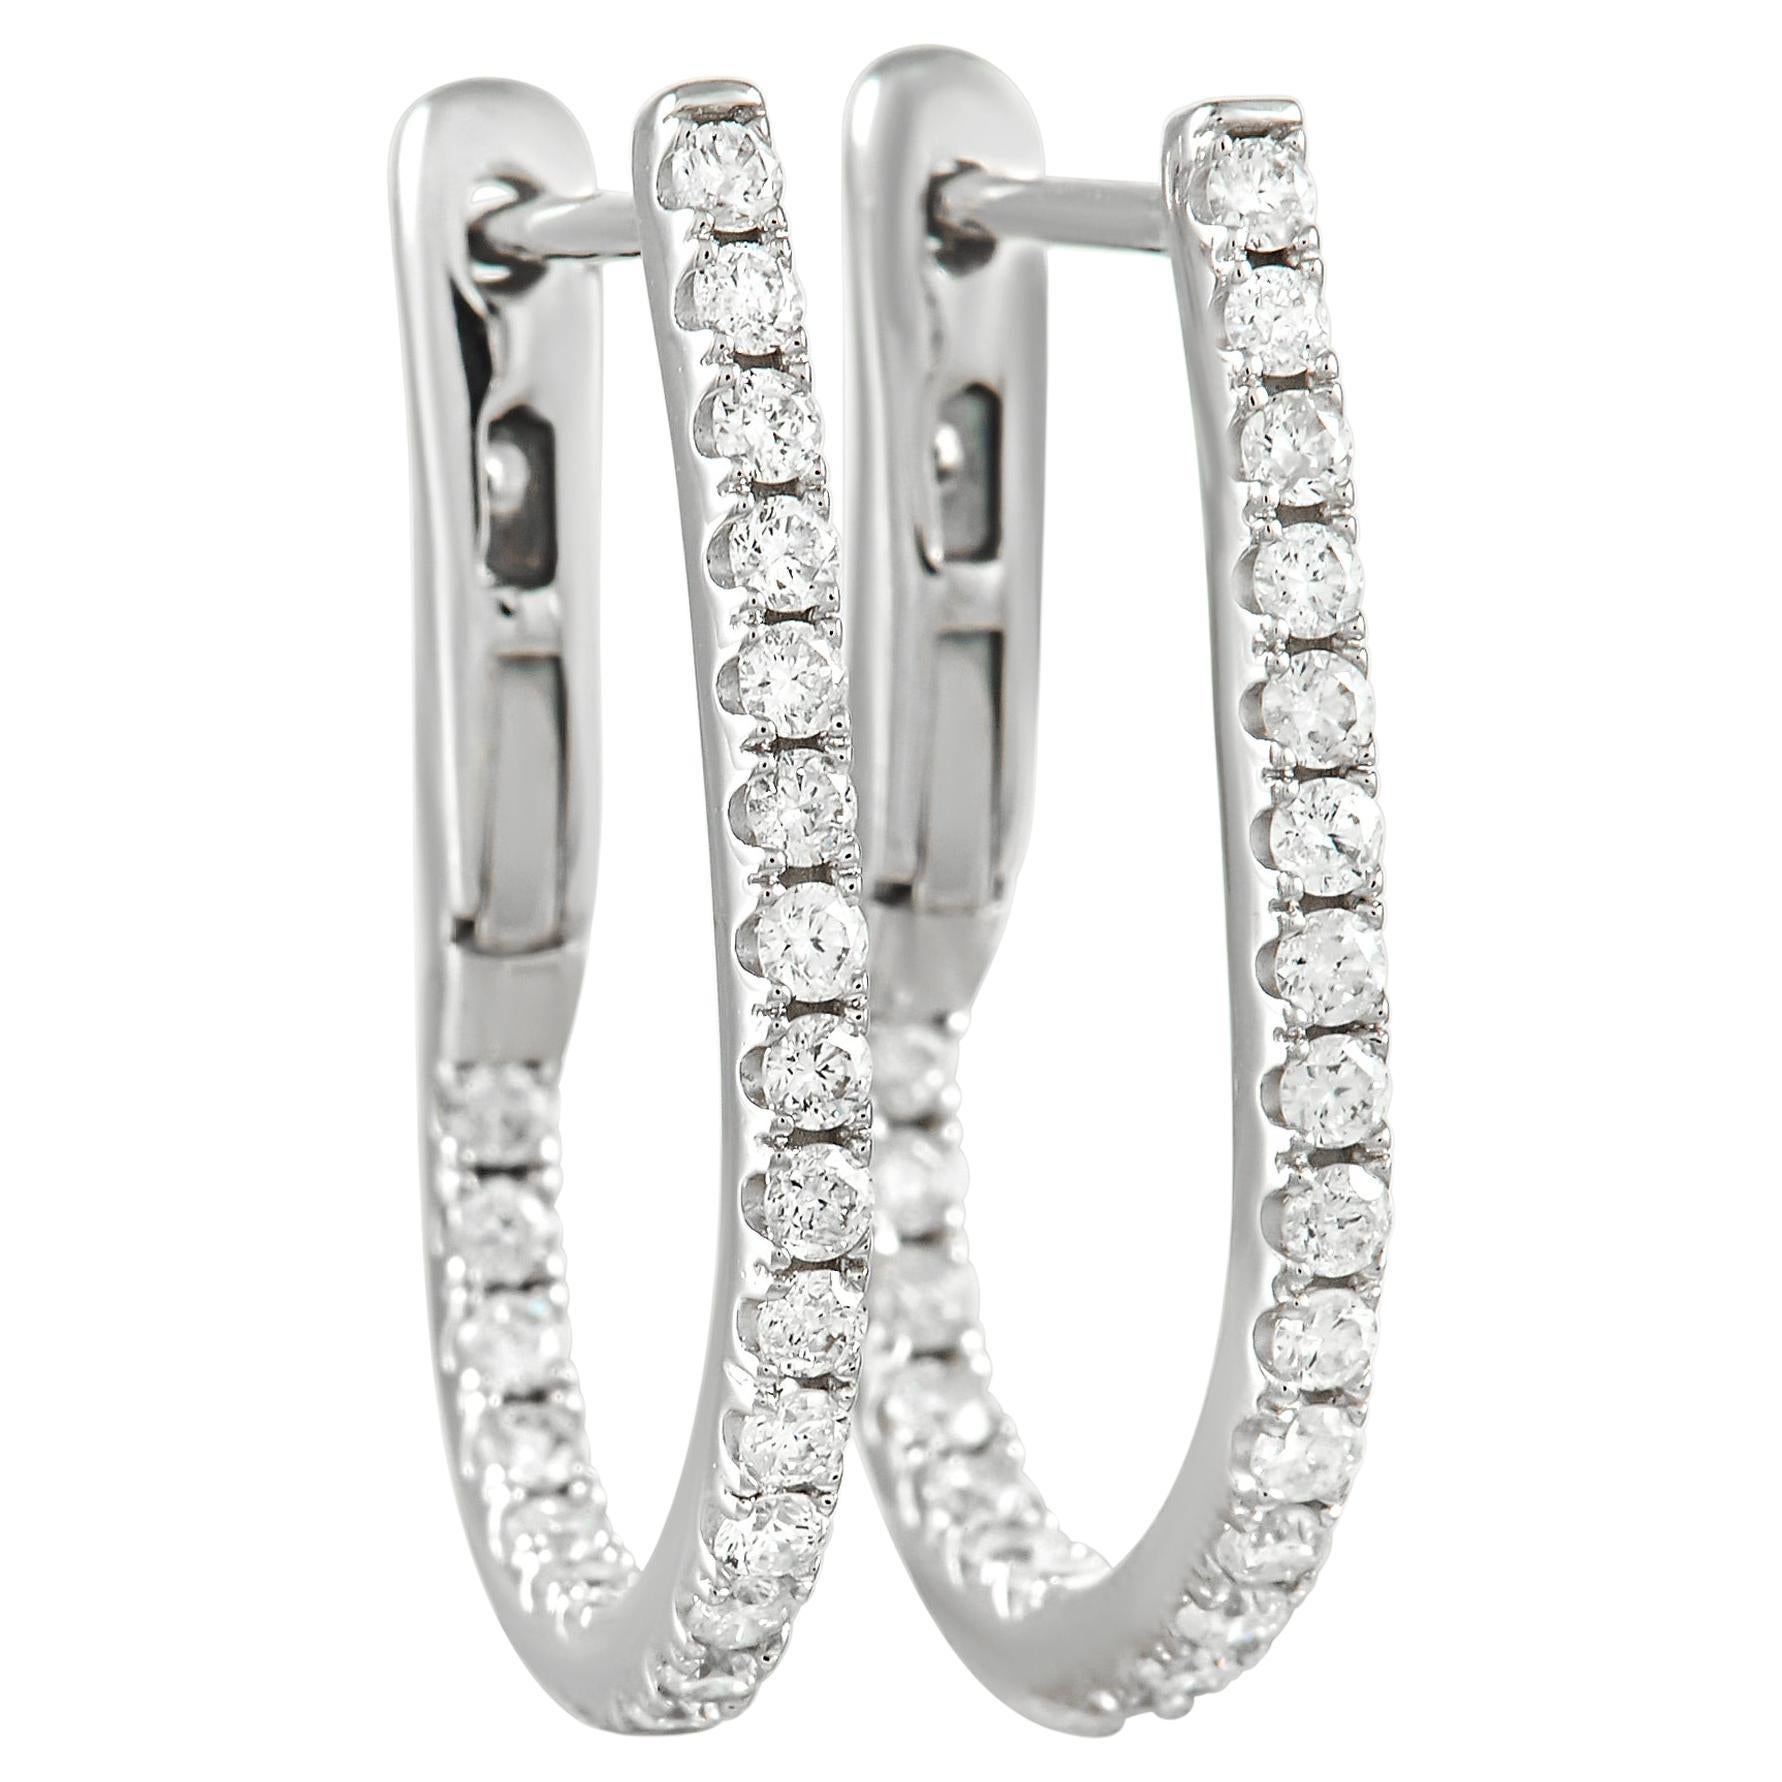 LB Exclusive 14K White Gold 0.51 Ct Diamond Inside Out Oval Hoop Earrings For Sale